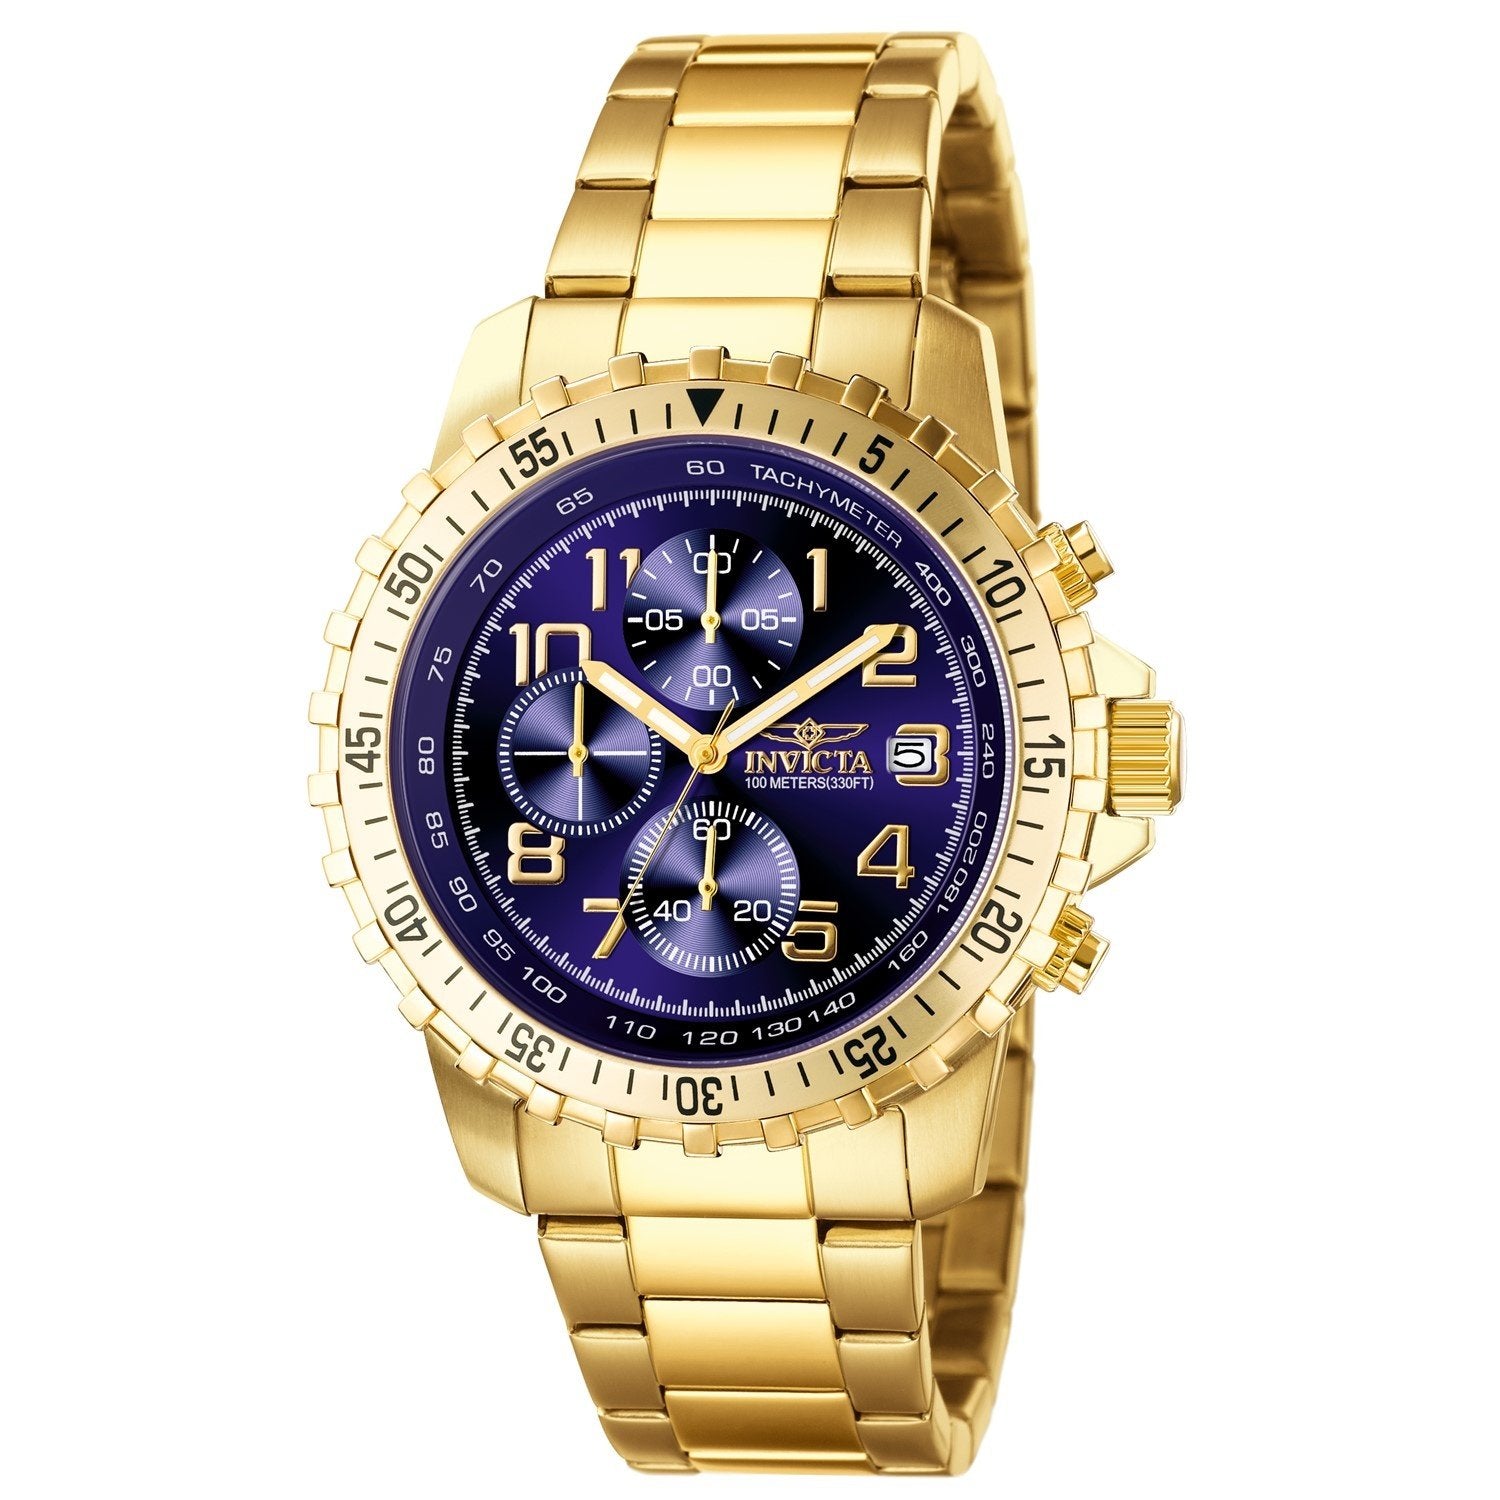 Invicta Men's 6399 Specialty Multi-Function Gold-tone Stainless Steel Watch